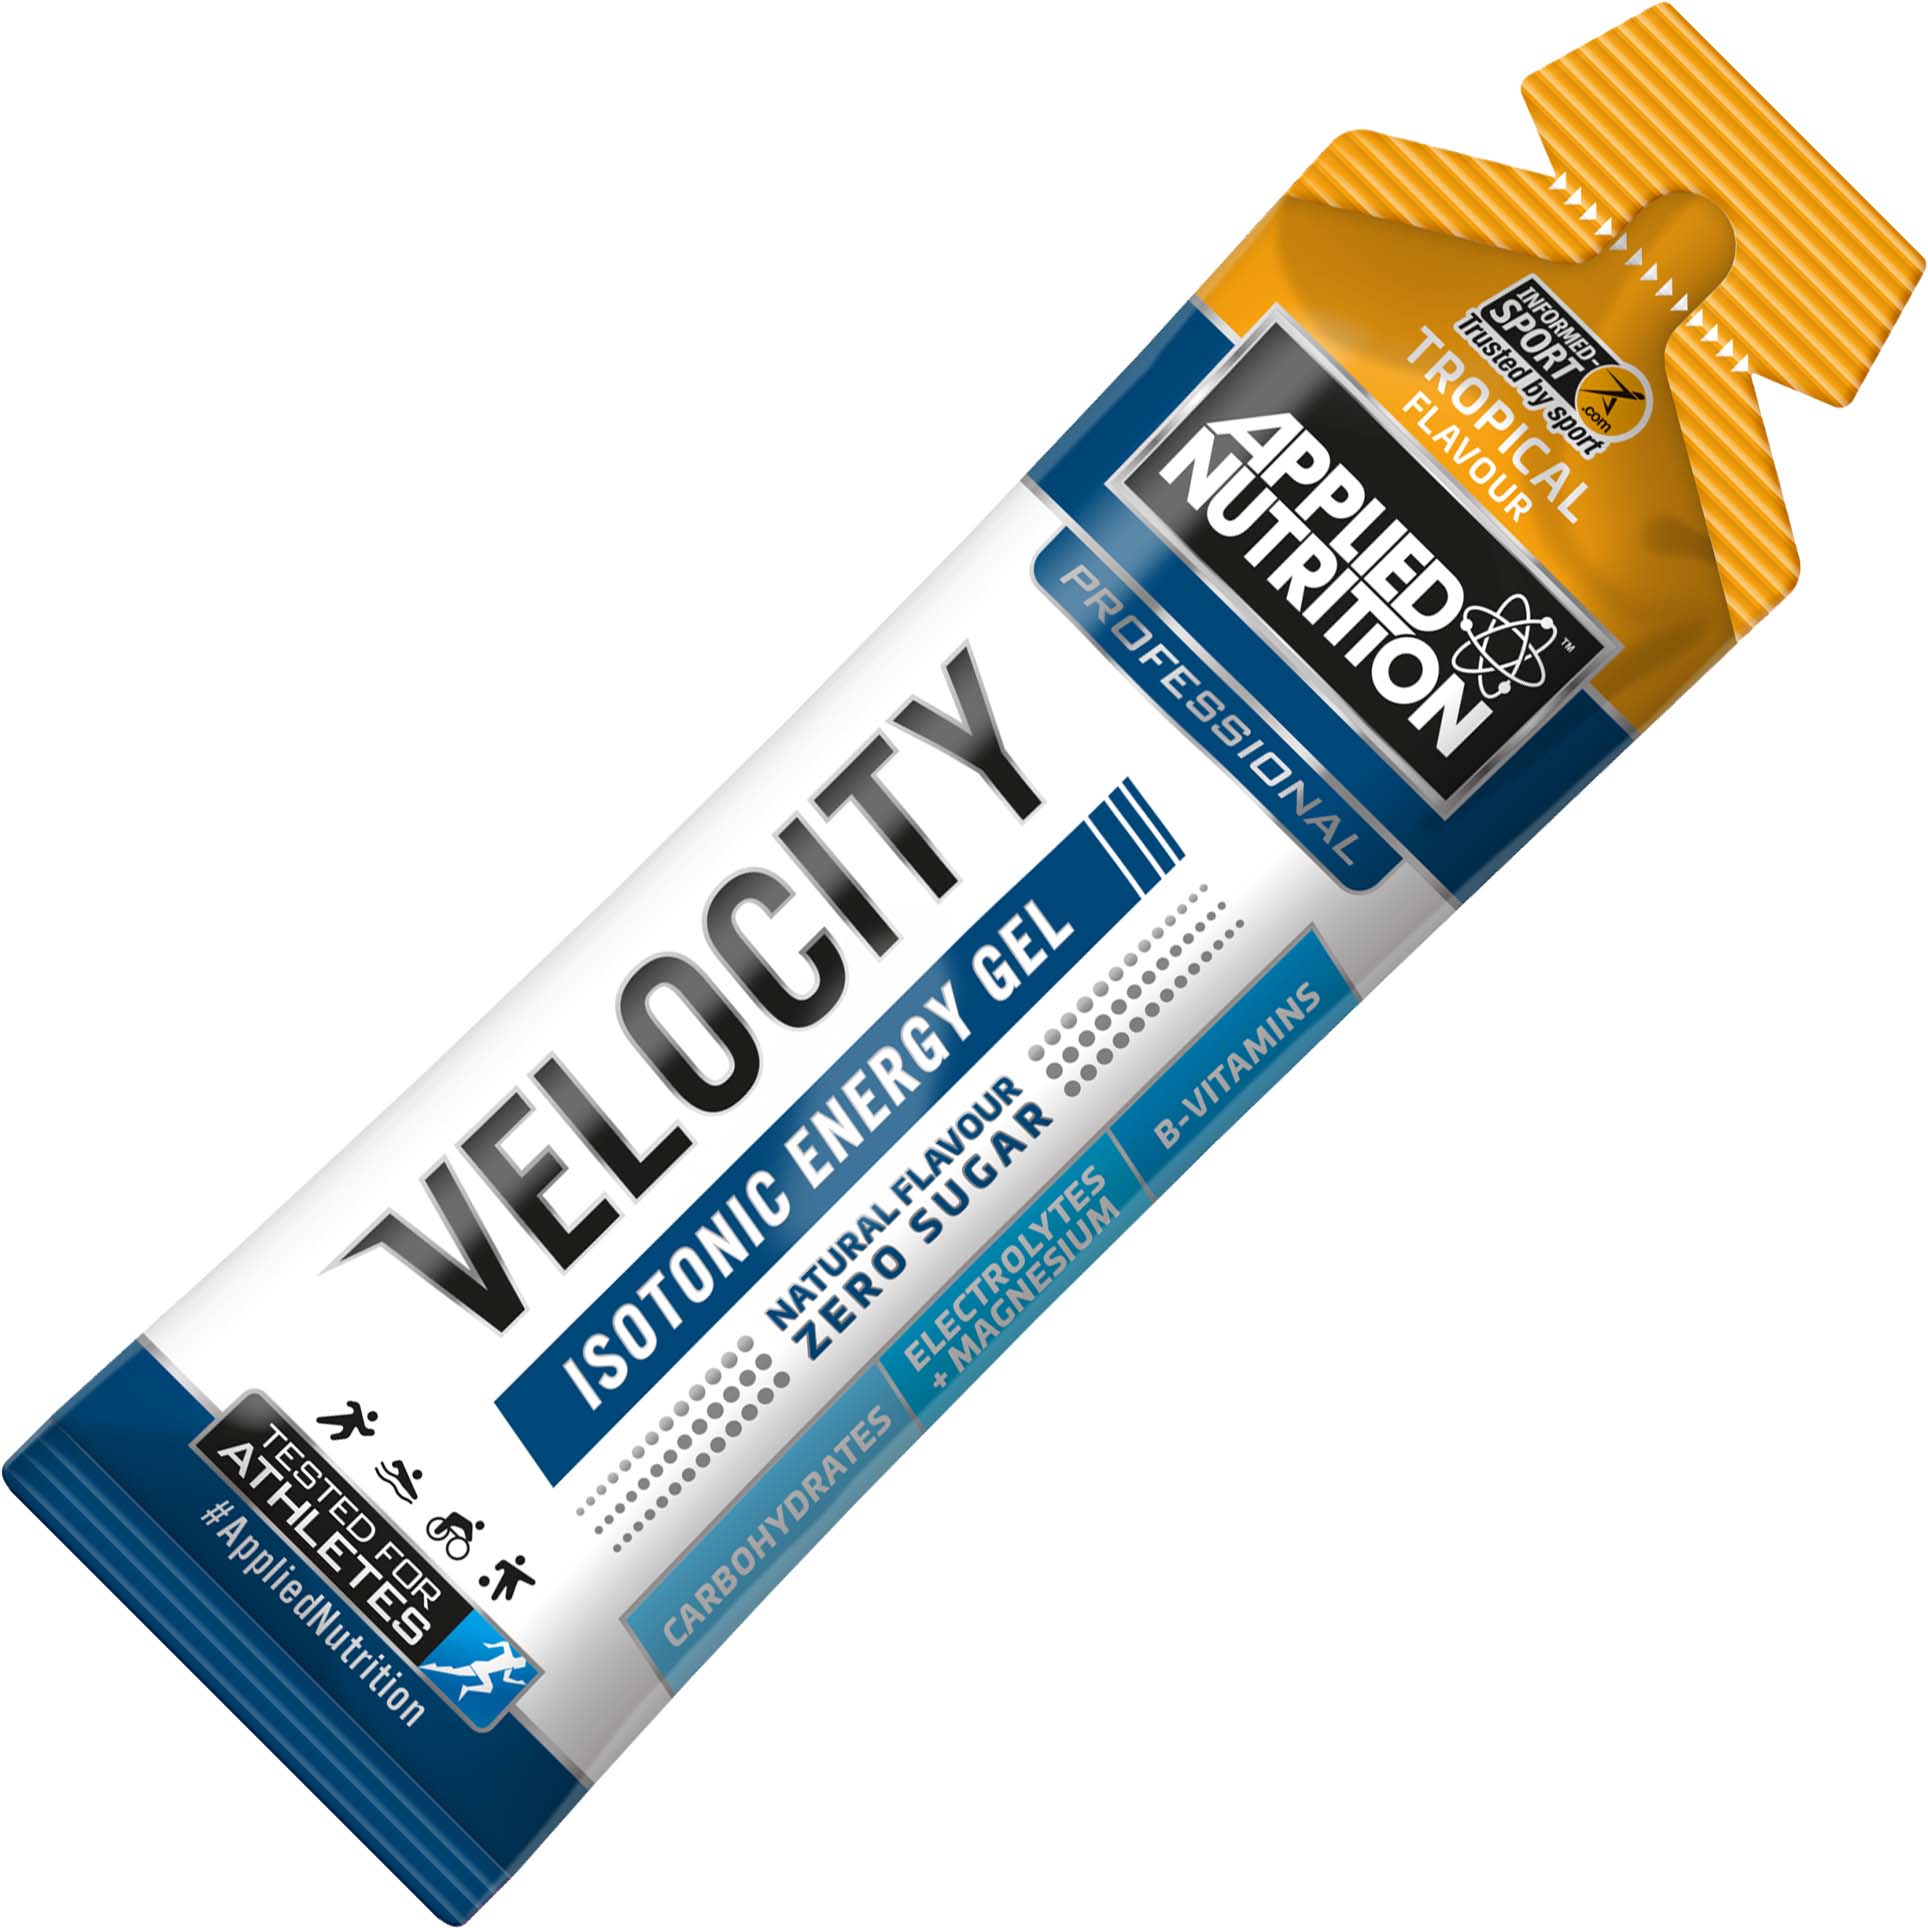 Applied Nutrition Velocity Isotonic Energy Gel, Tropical, 1 Piece